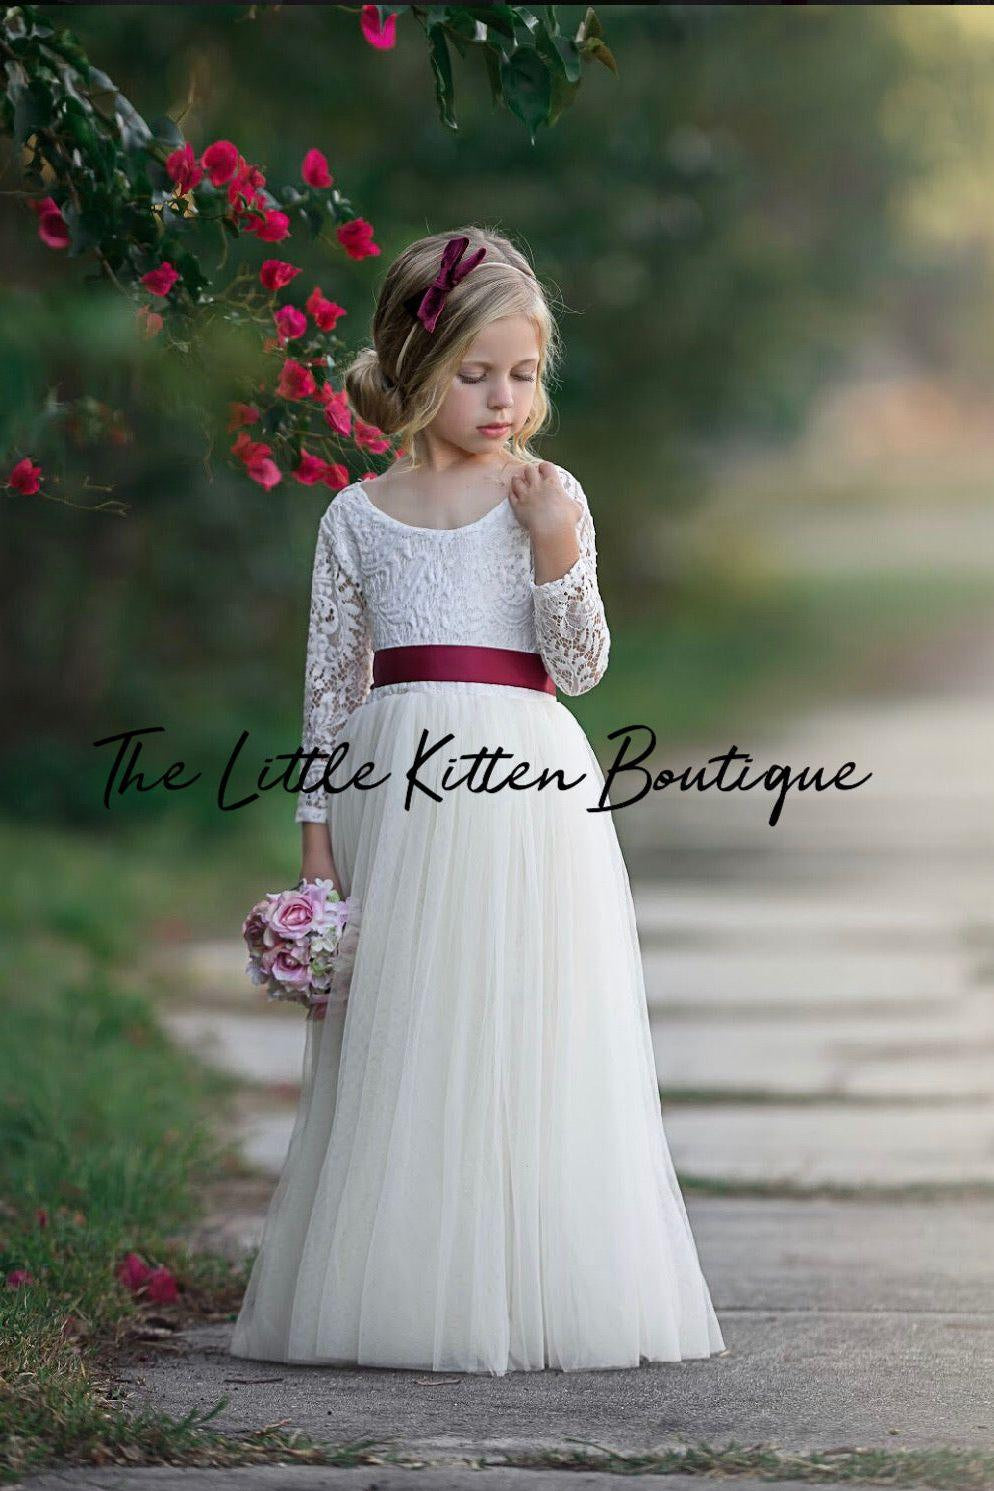 Classic Long Sleeve Tulle and Lace Flower Girl Dress / Girls Special Occasion Dress - The Little Kitten Boutique